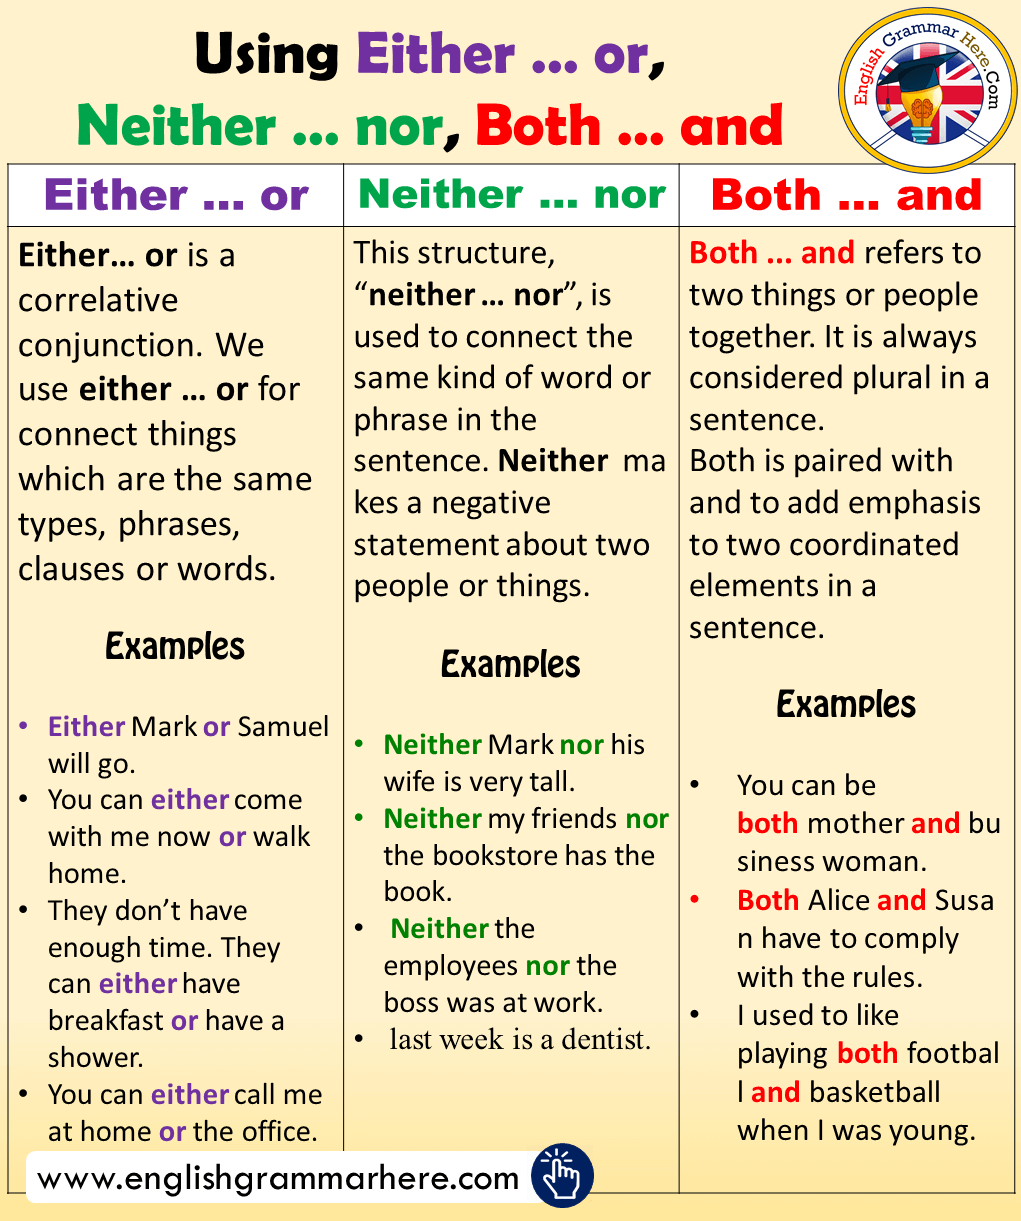 Using Either … or, Neither … nor, Both … and in English